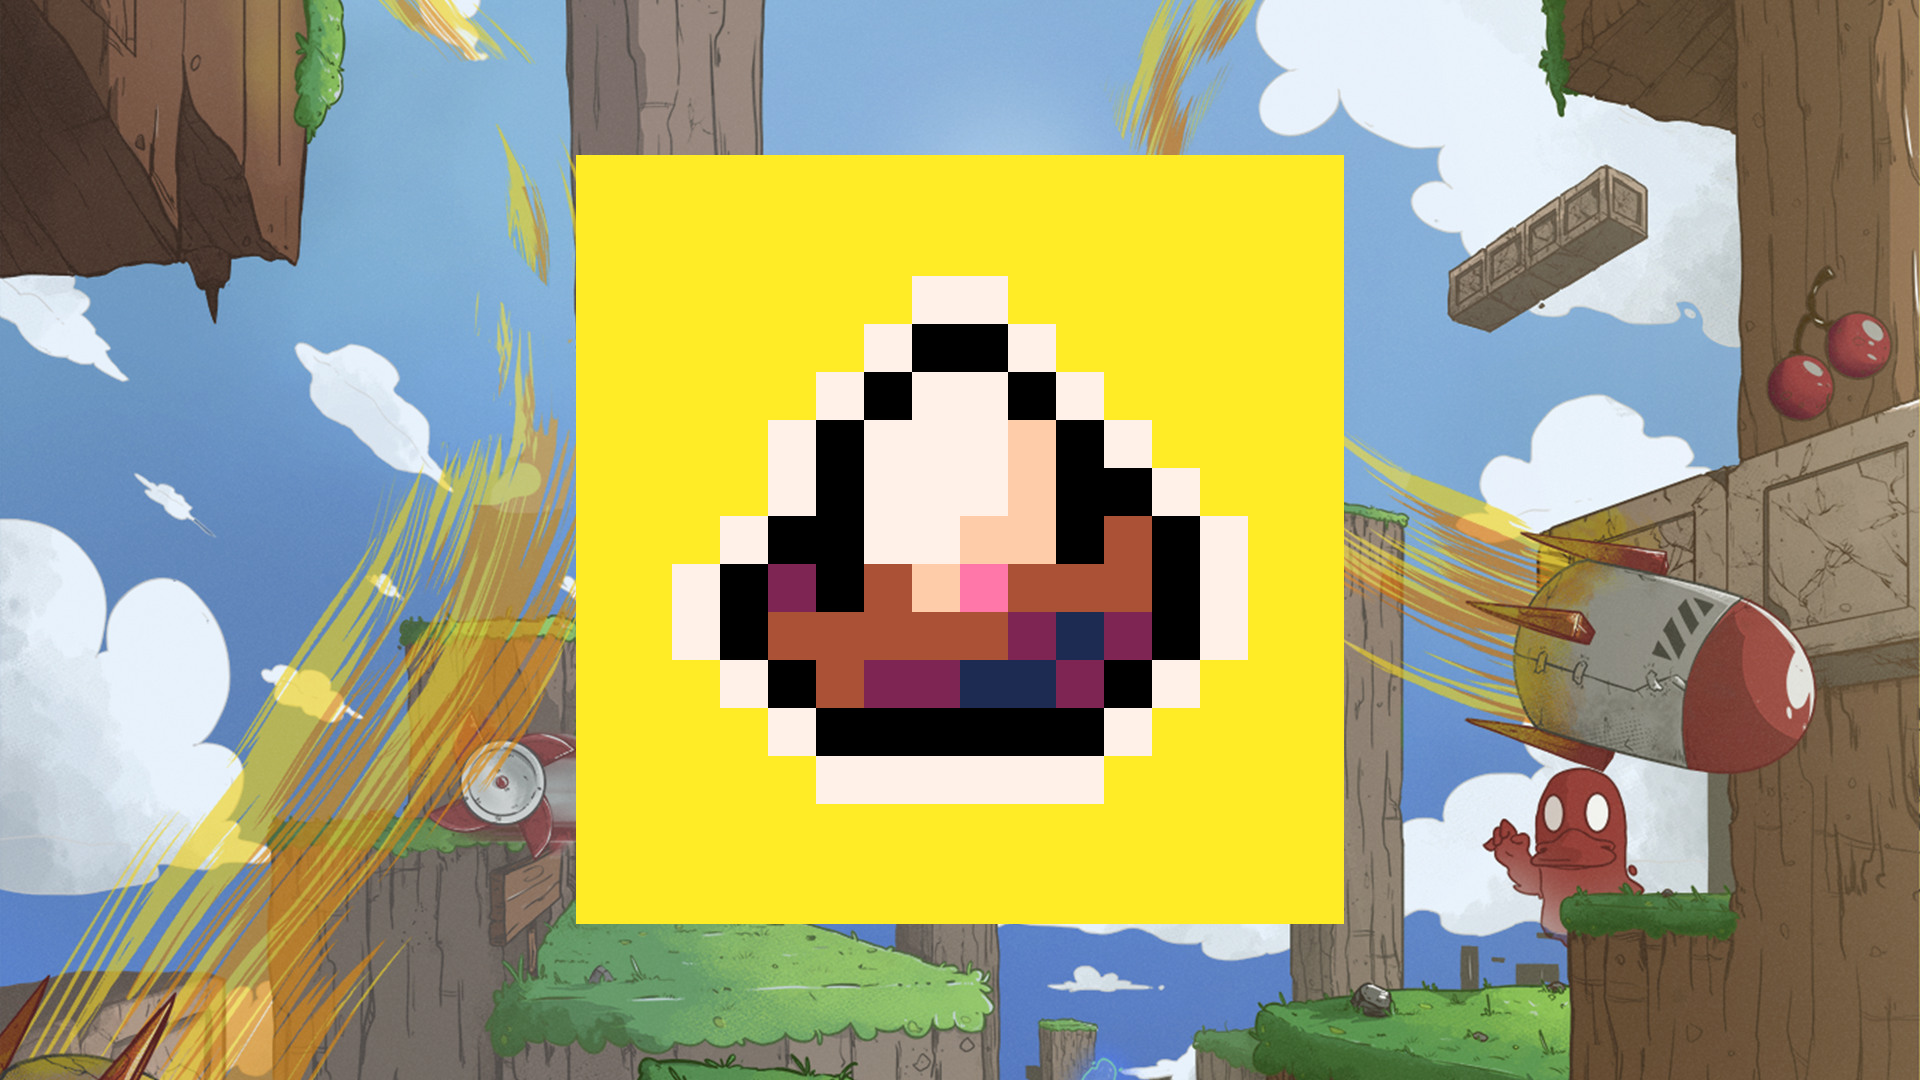 Icon for Easter egg